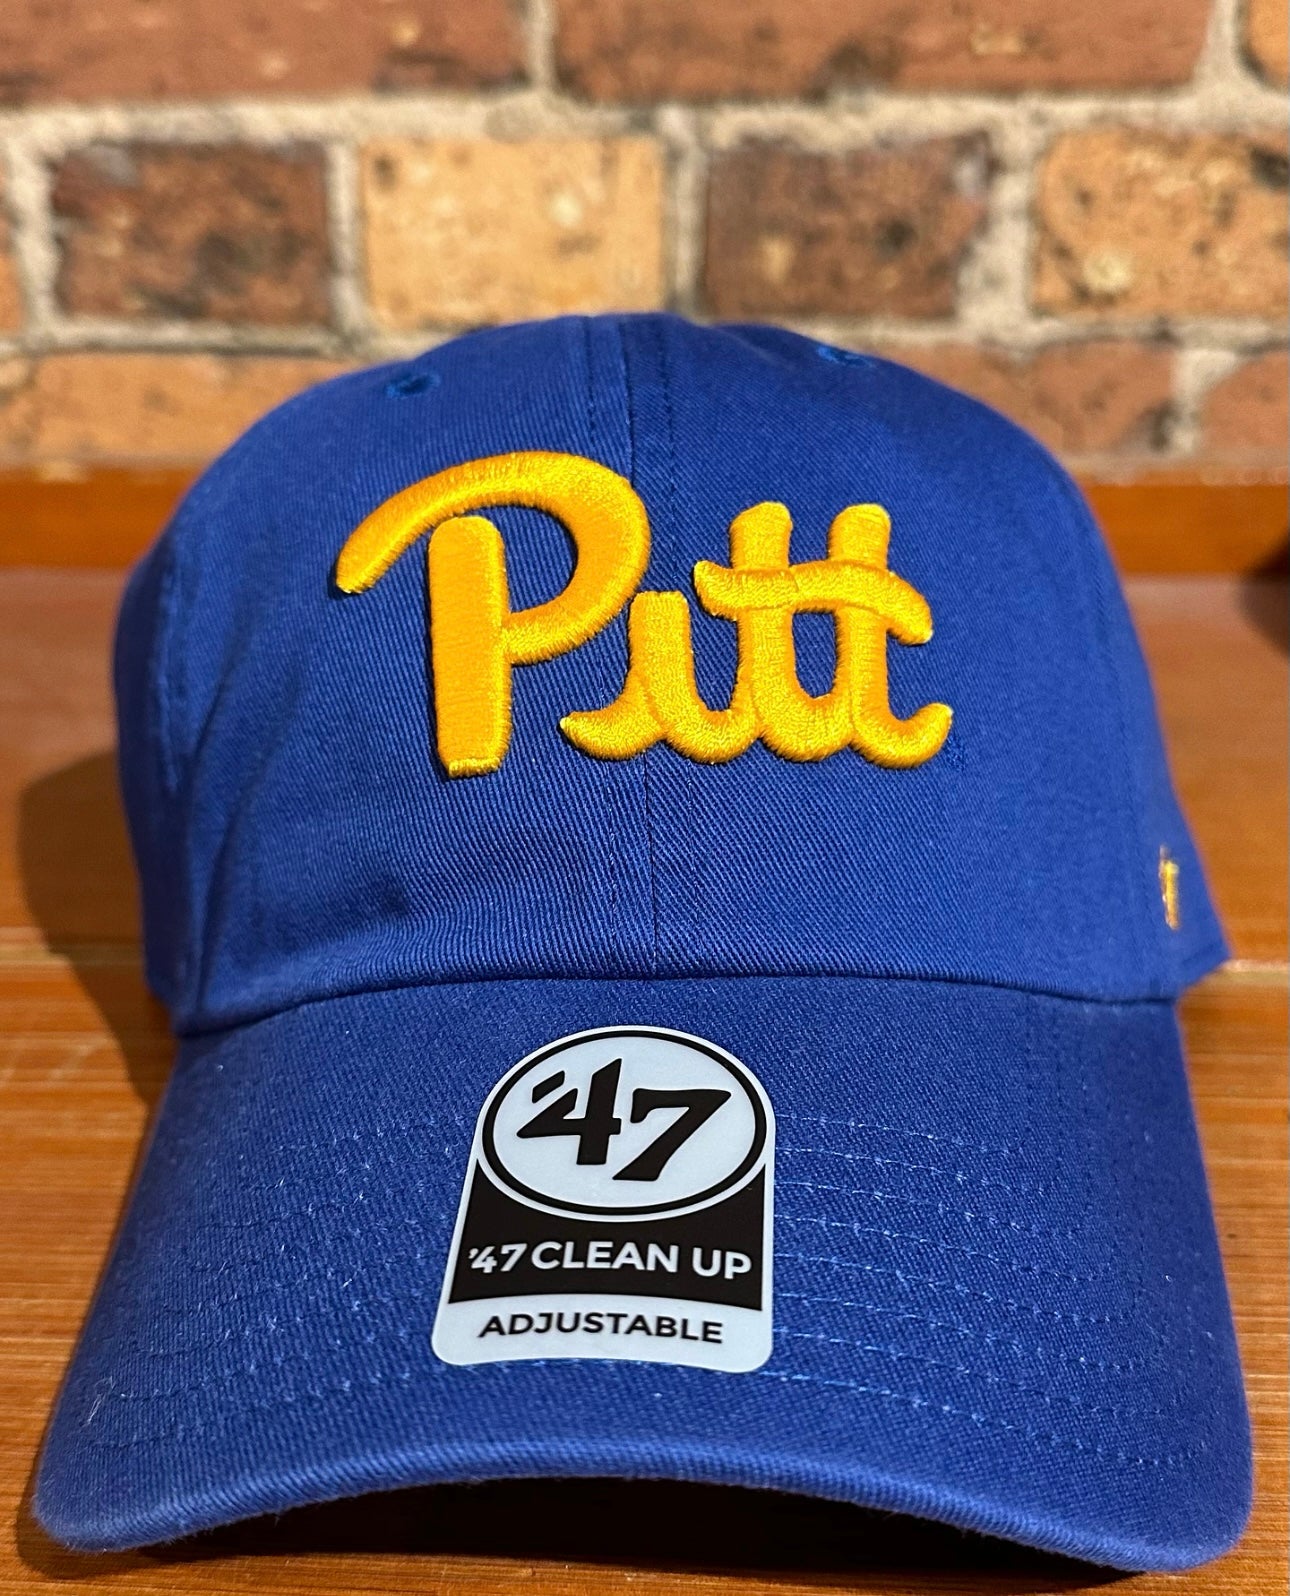 Pittsburgh Panthers Clean Up Hat - 47 Brand (Royal)